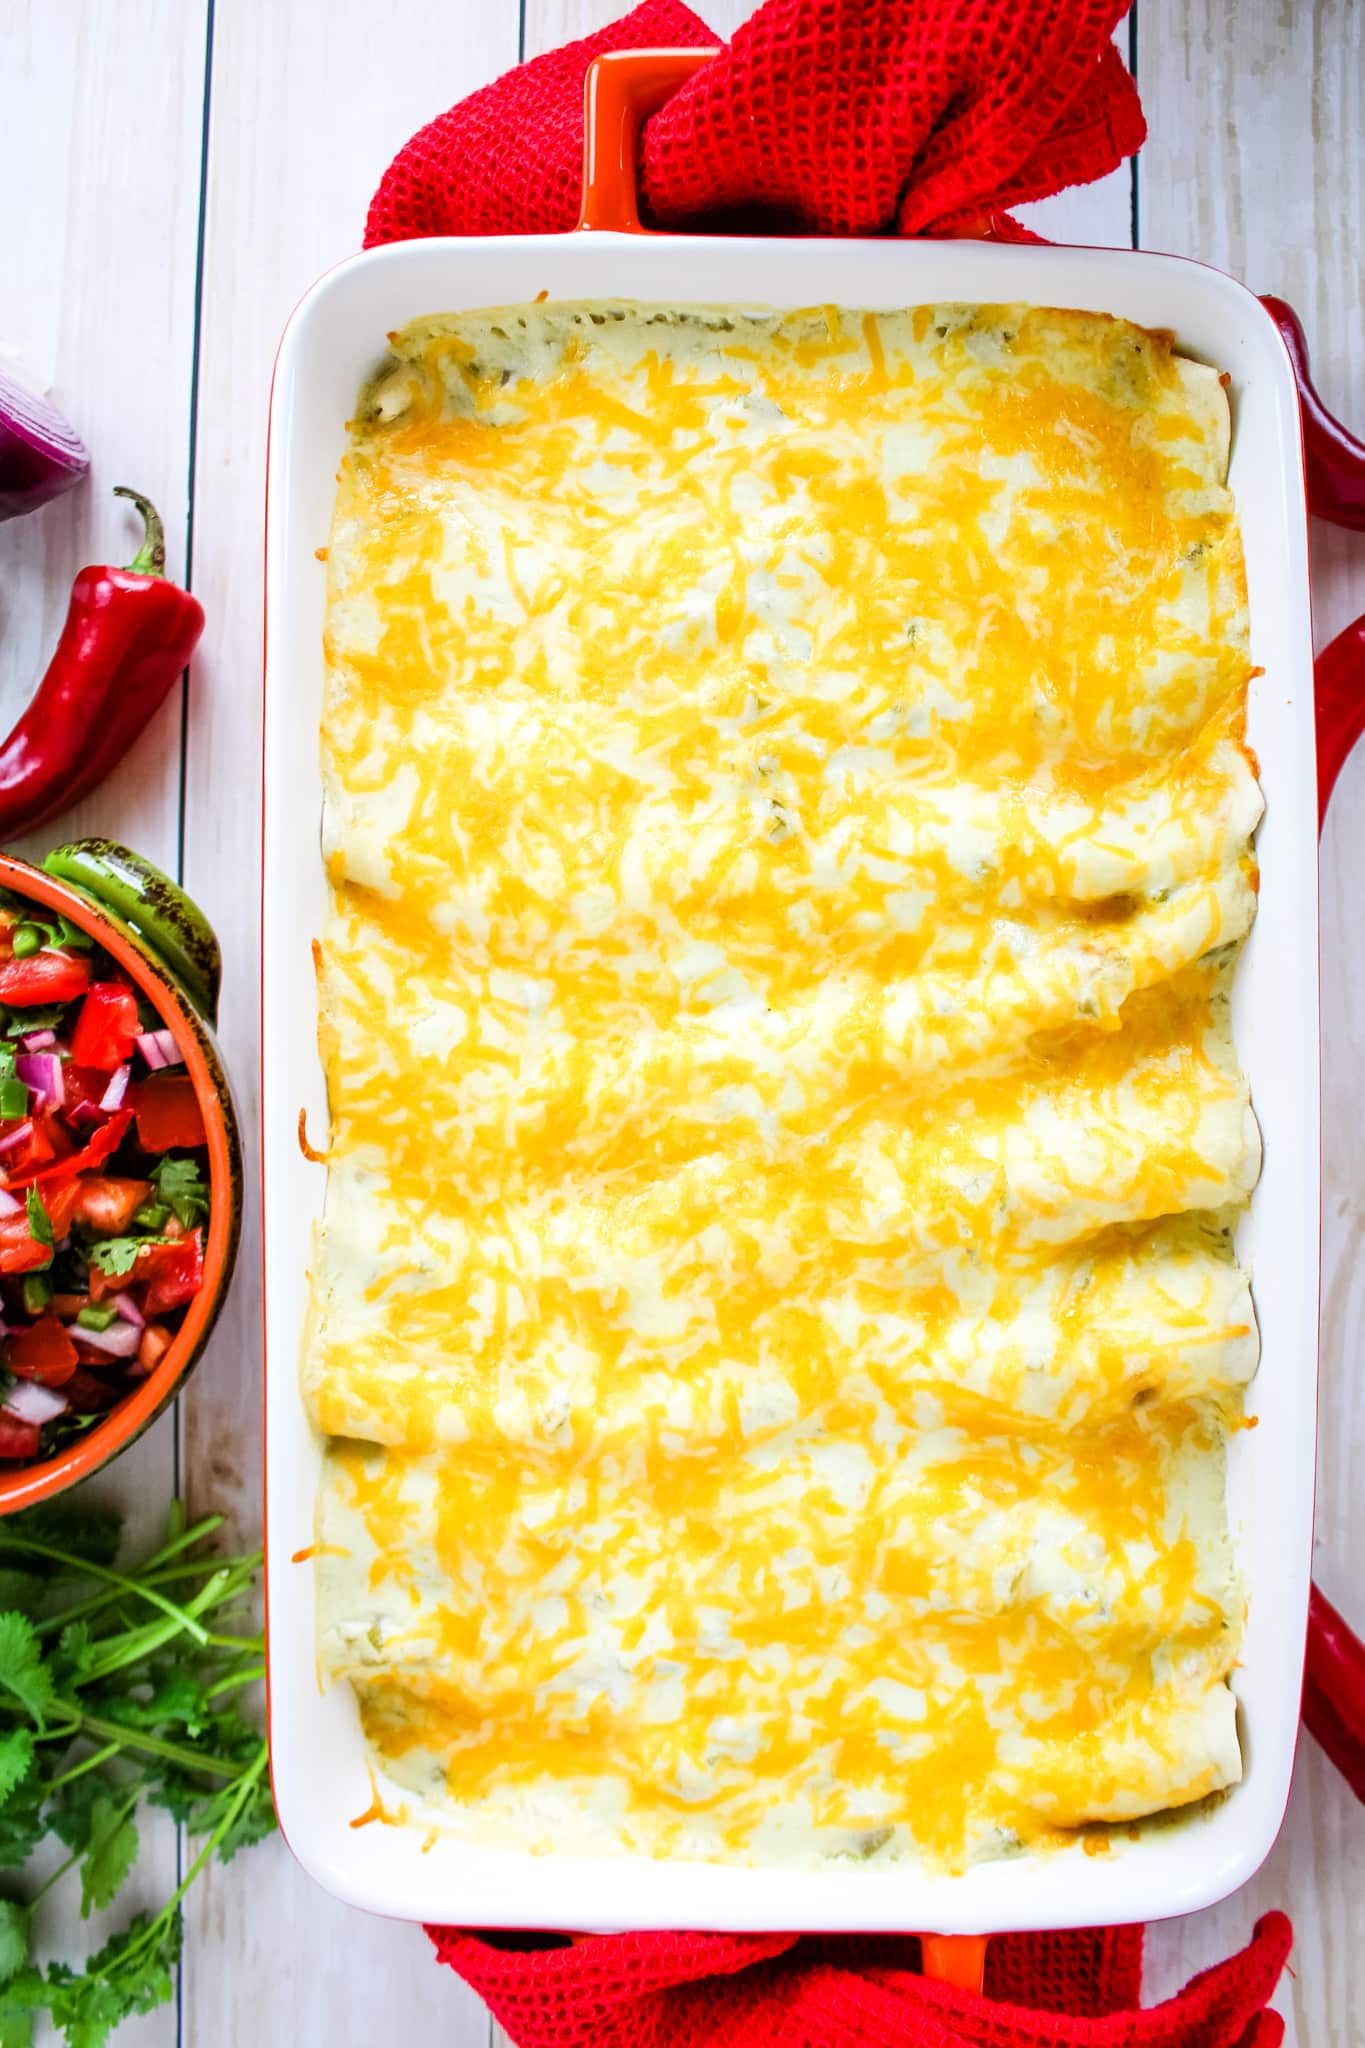 Baked enchiladas topped with melted cheese.